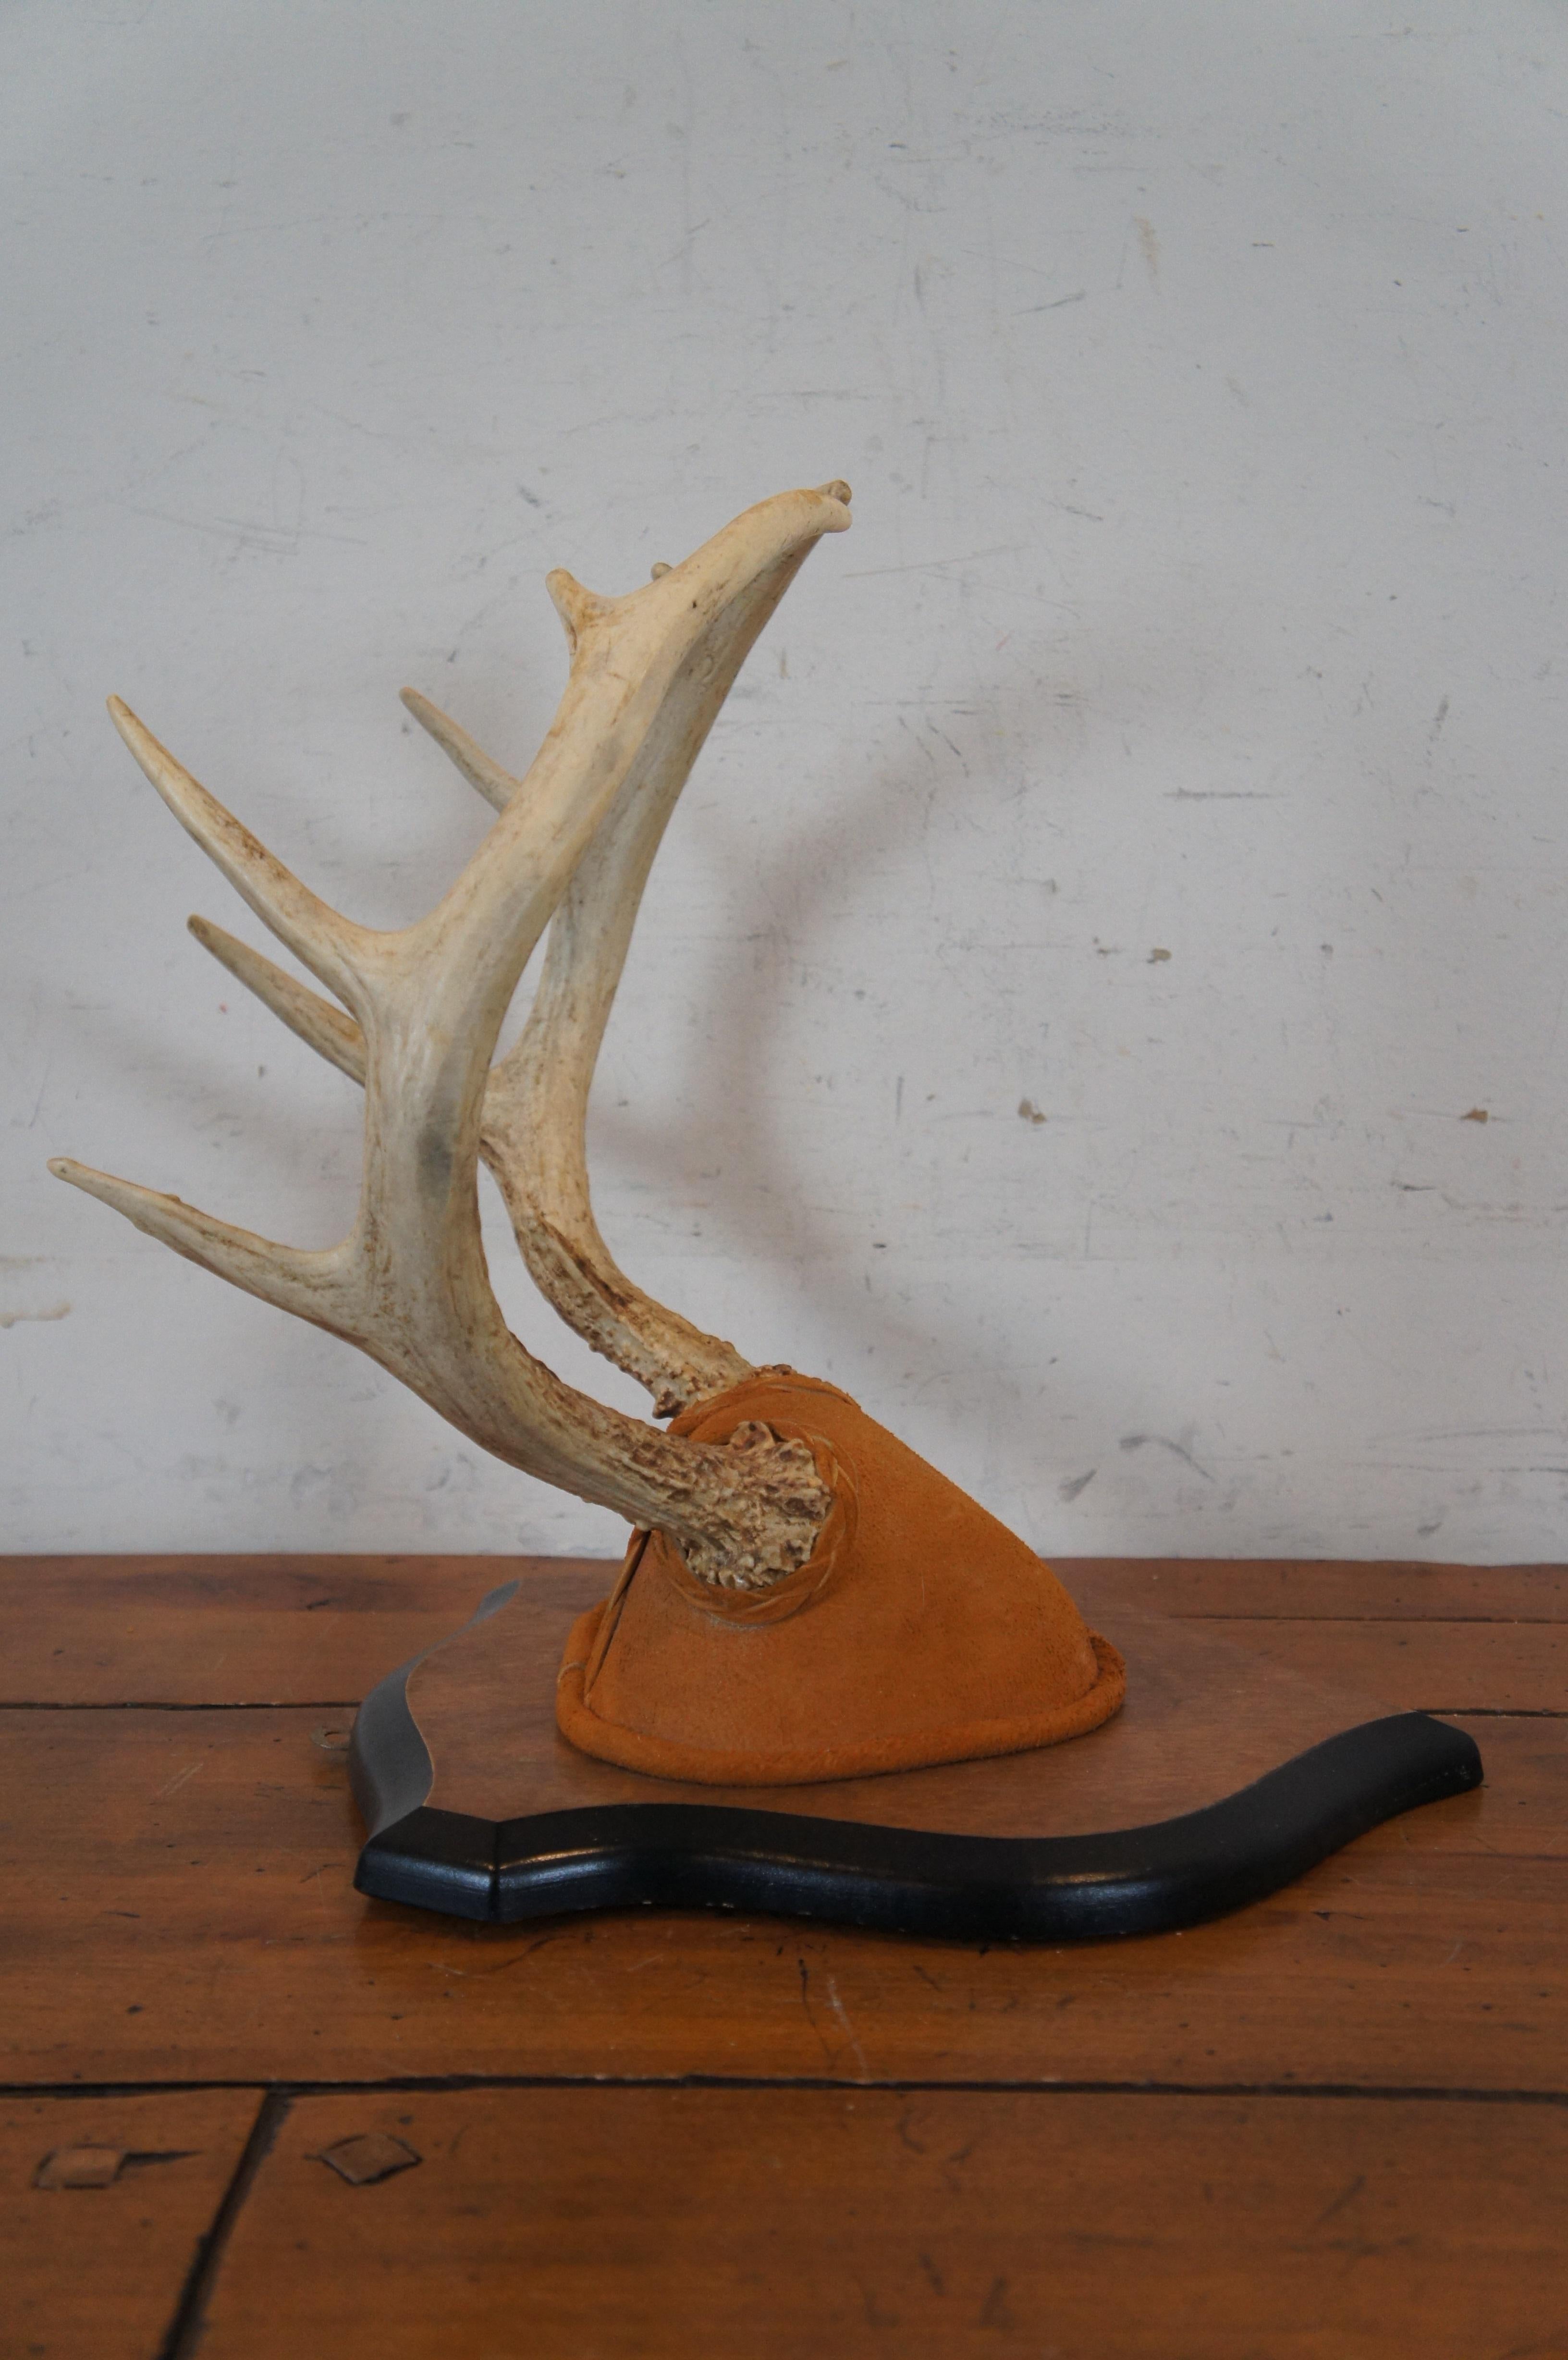 20th Century Vintage 10 Point Deer Antler Horn Suede Shield Plaque Taxidermy Mount 14